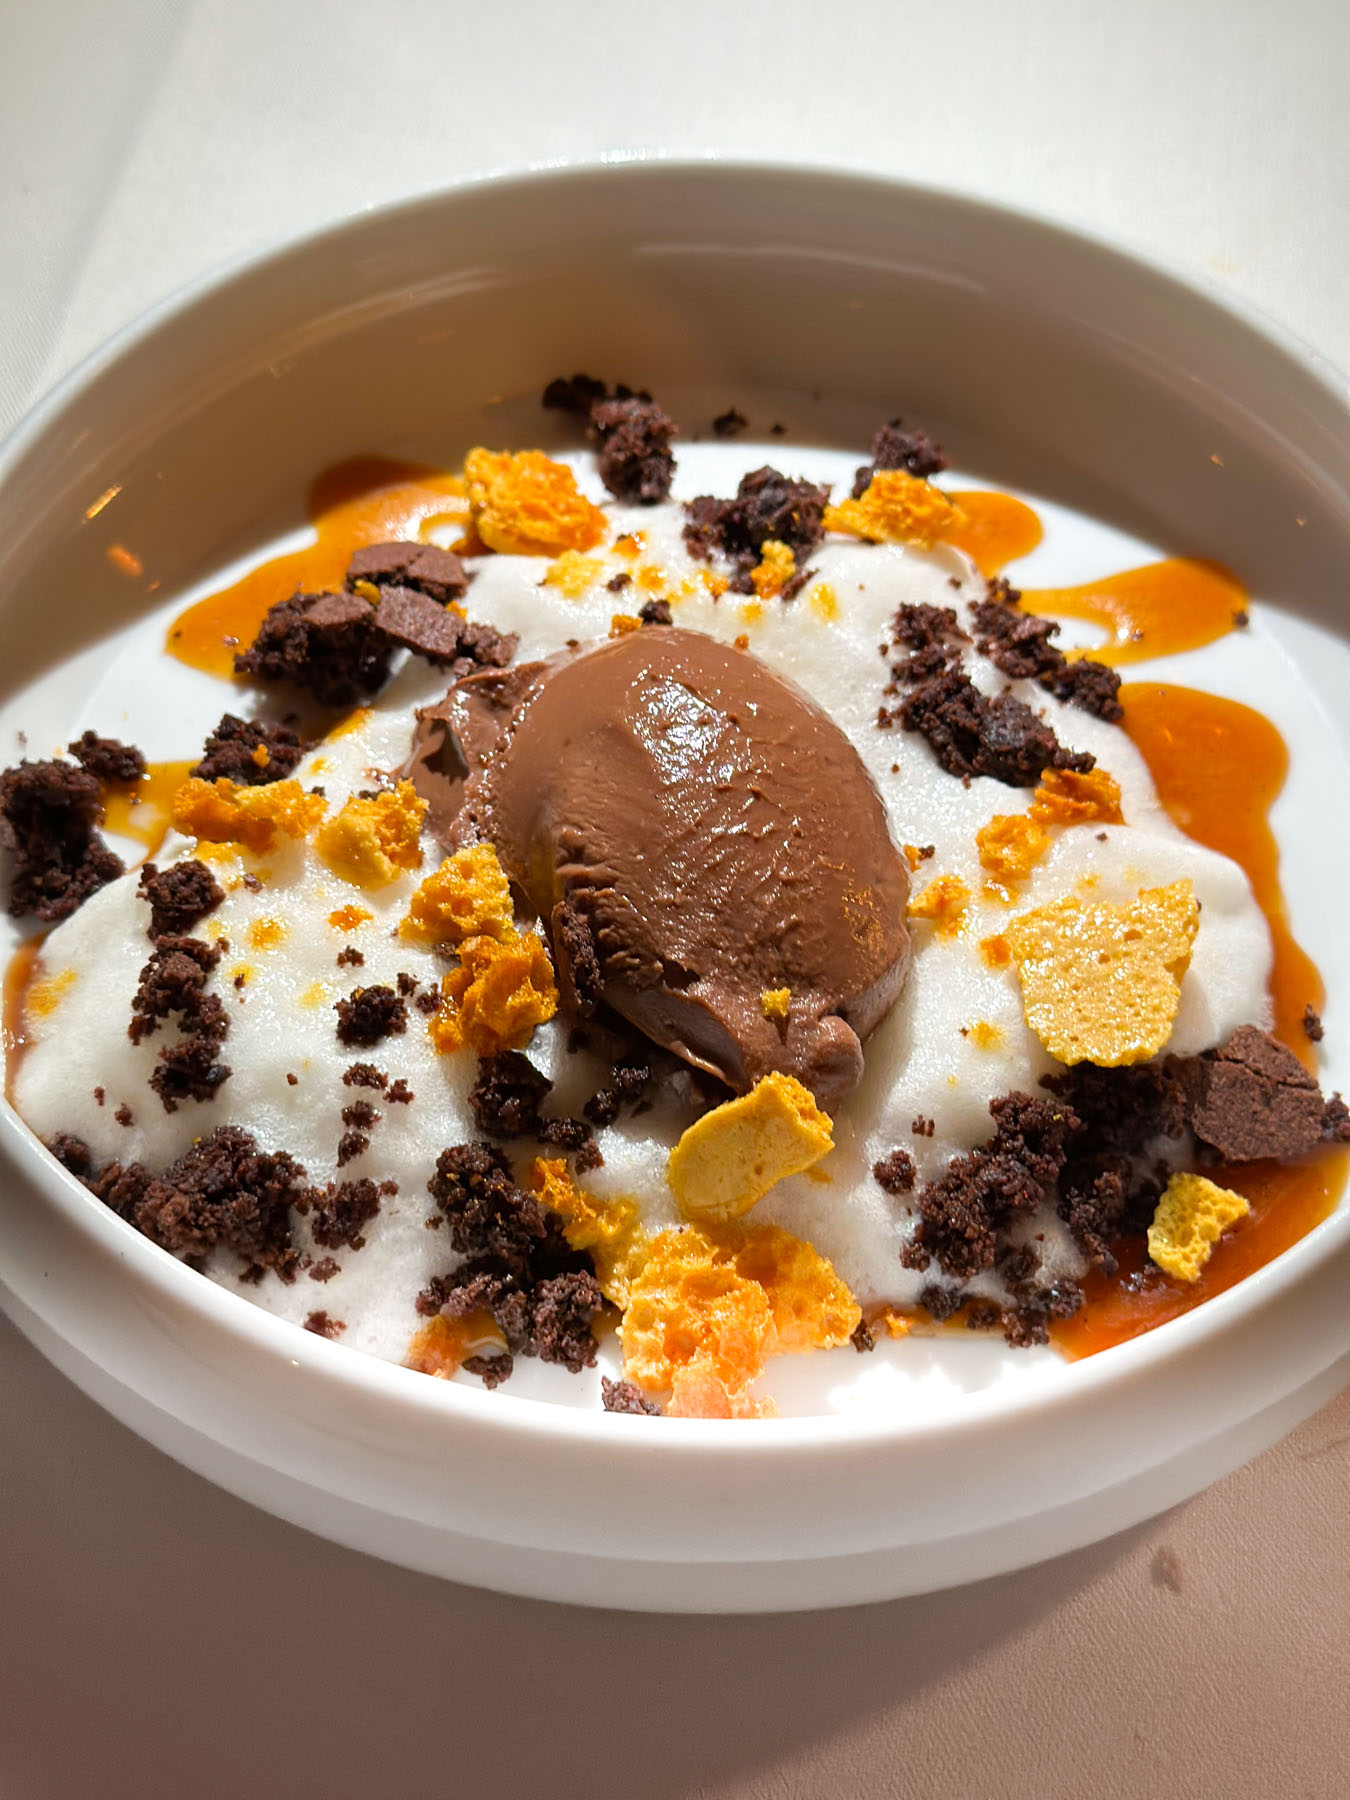 Ciccolata (Chocolate Dessert with Buttermilk Foam, Fudgy Brownie, Honey Comb, and Caramel) in a white bowl - at Cafe Monarch in Scottsdale AZ.